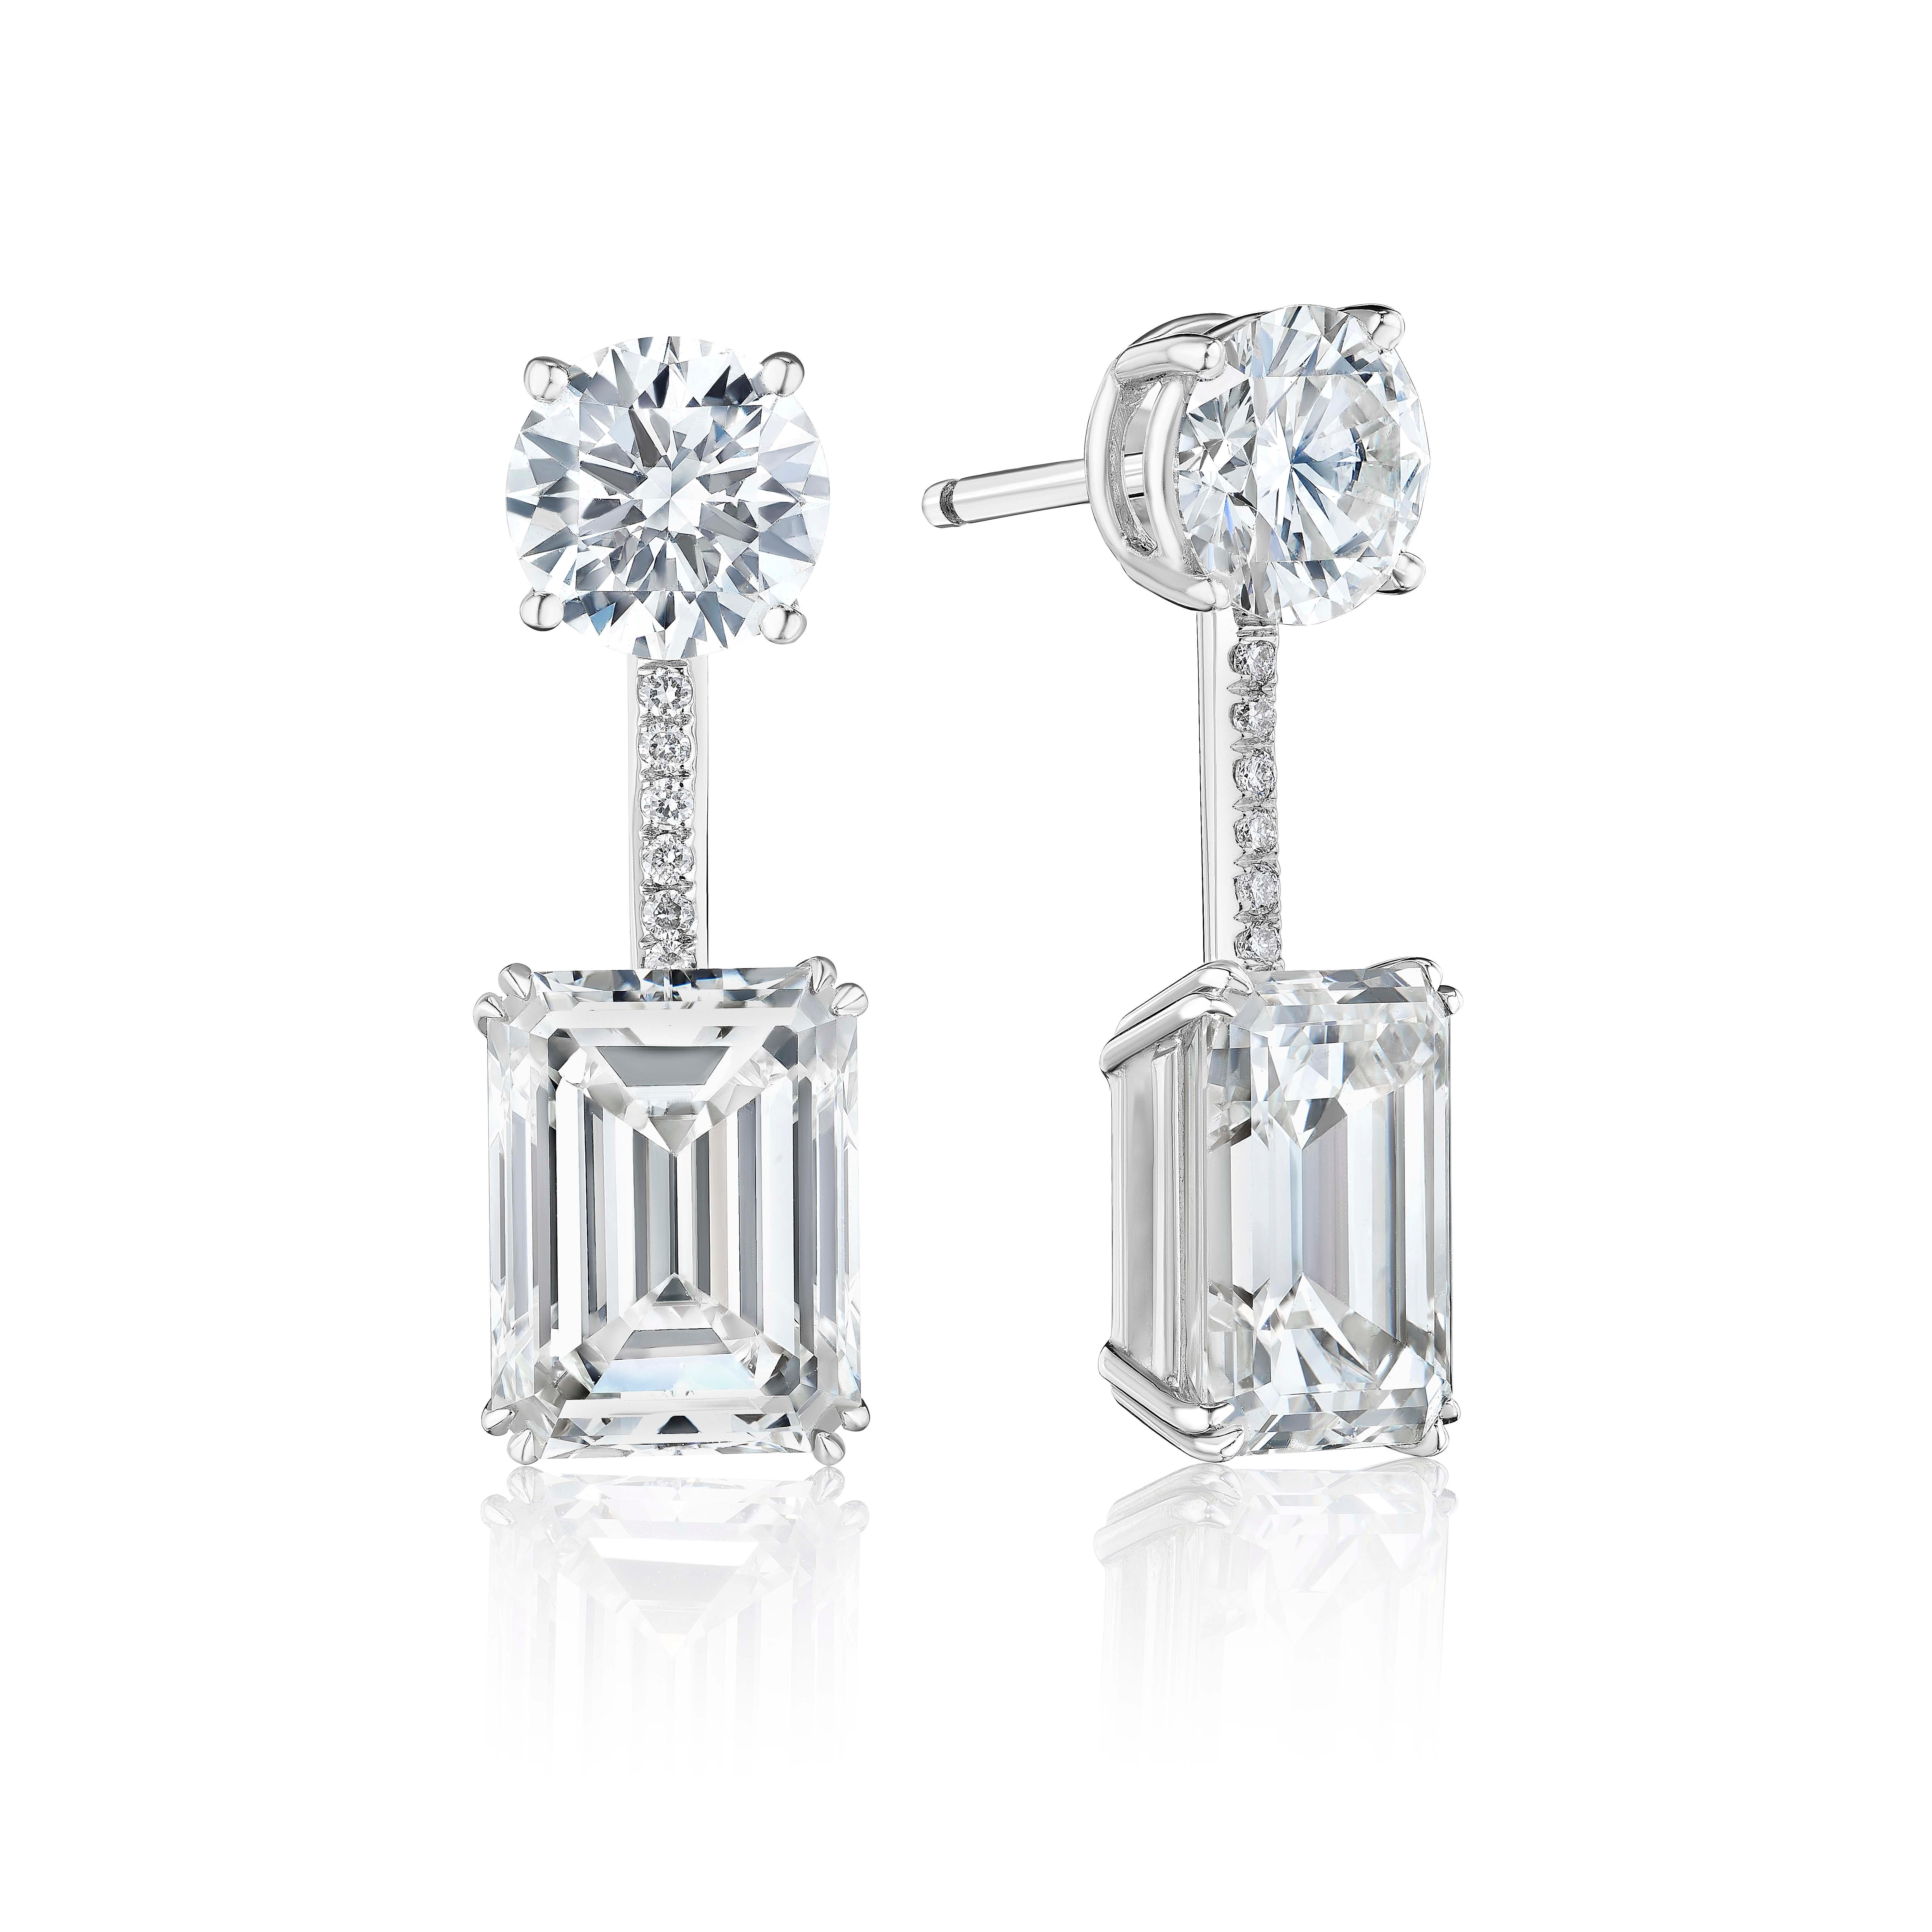 Matched pair of 10.0 carat Emerald Cut Diamond Stud Earrings Set in Platinum.
Suspended from Diamonds weighing 2.50 Carats.
Stones are of J color and VS Clarity.
GIA Certified.

Can be made as a push back, screw back or omega backs.